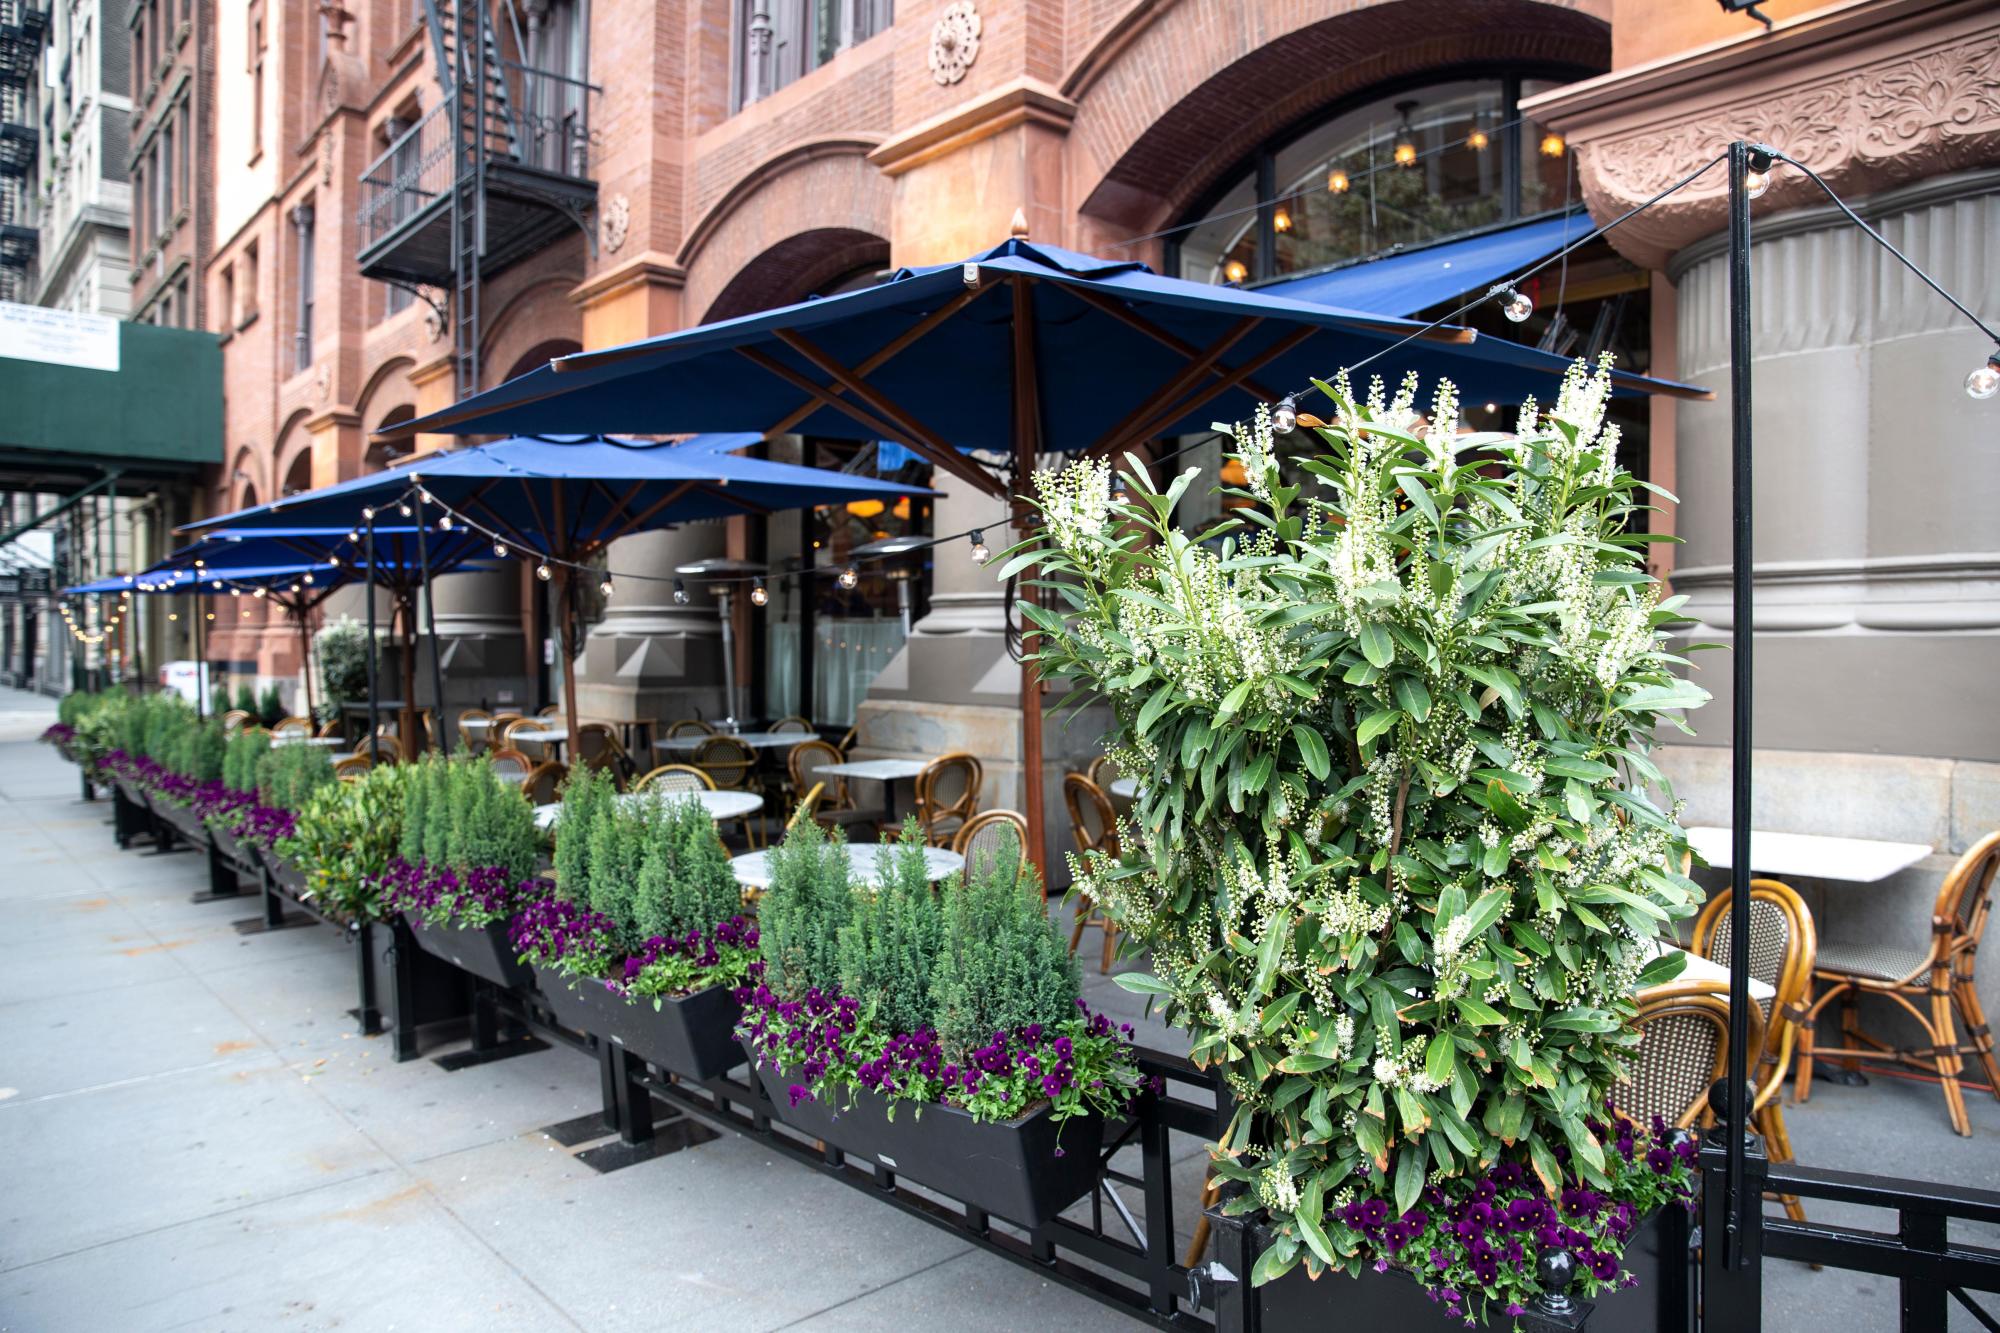 UK's Al Fresco Culture Change – Creating Safe Outdoor Dining Spaces